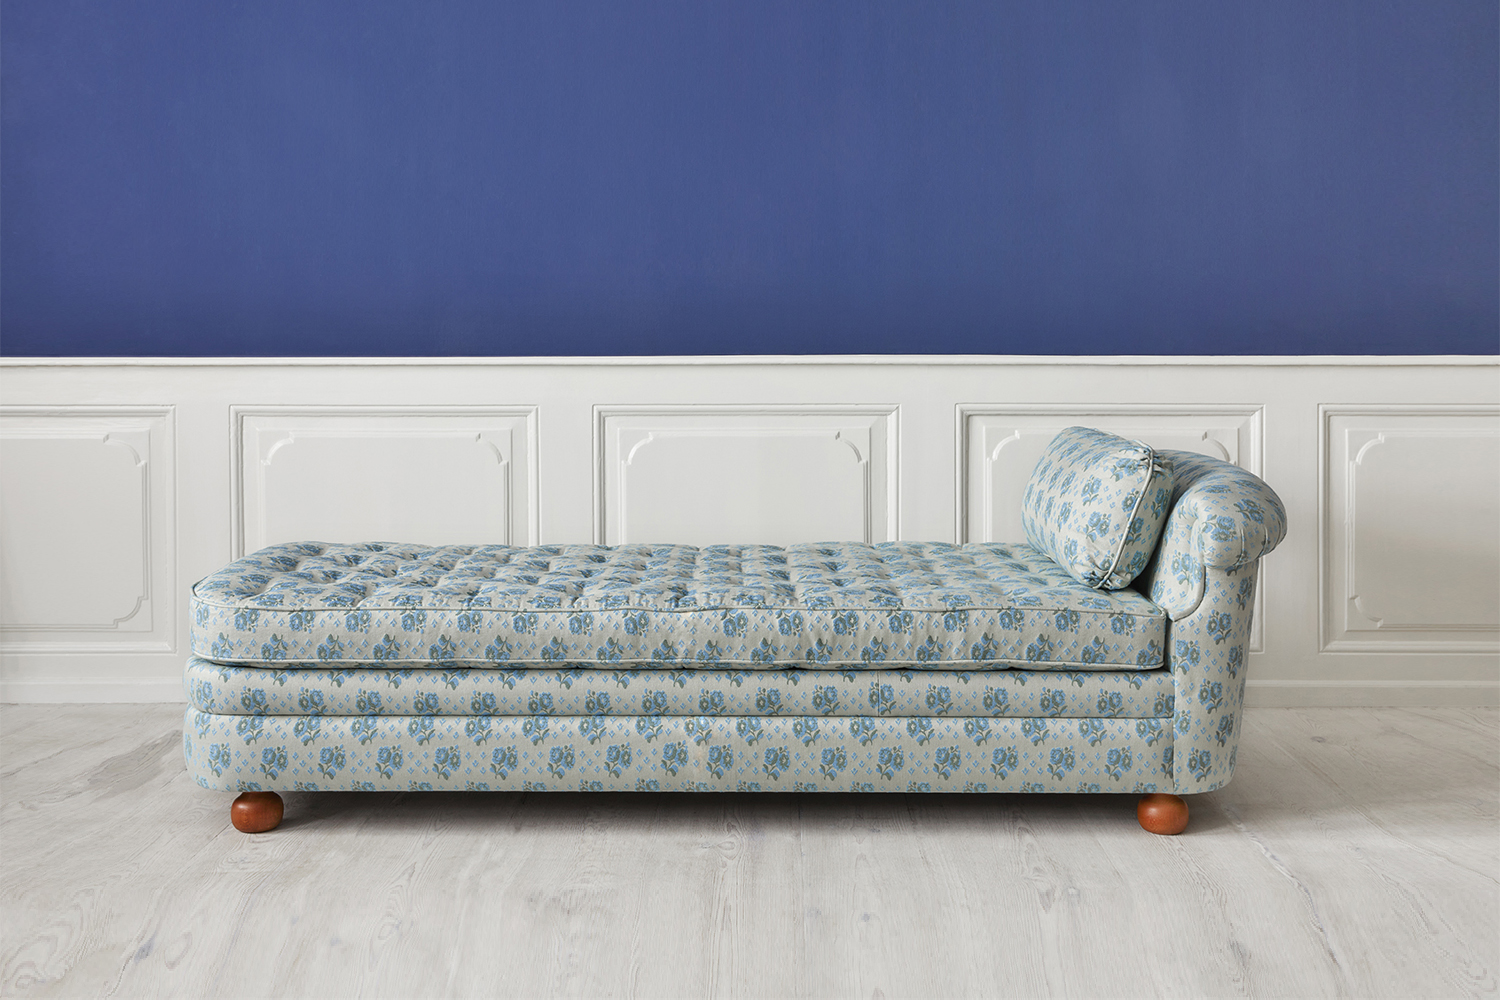 a similar daybed is the svenskt tenn daybed designed by josef frank in \1938, a 15